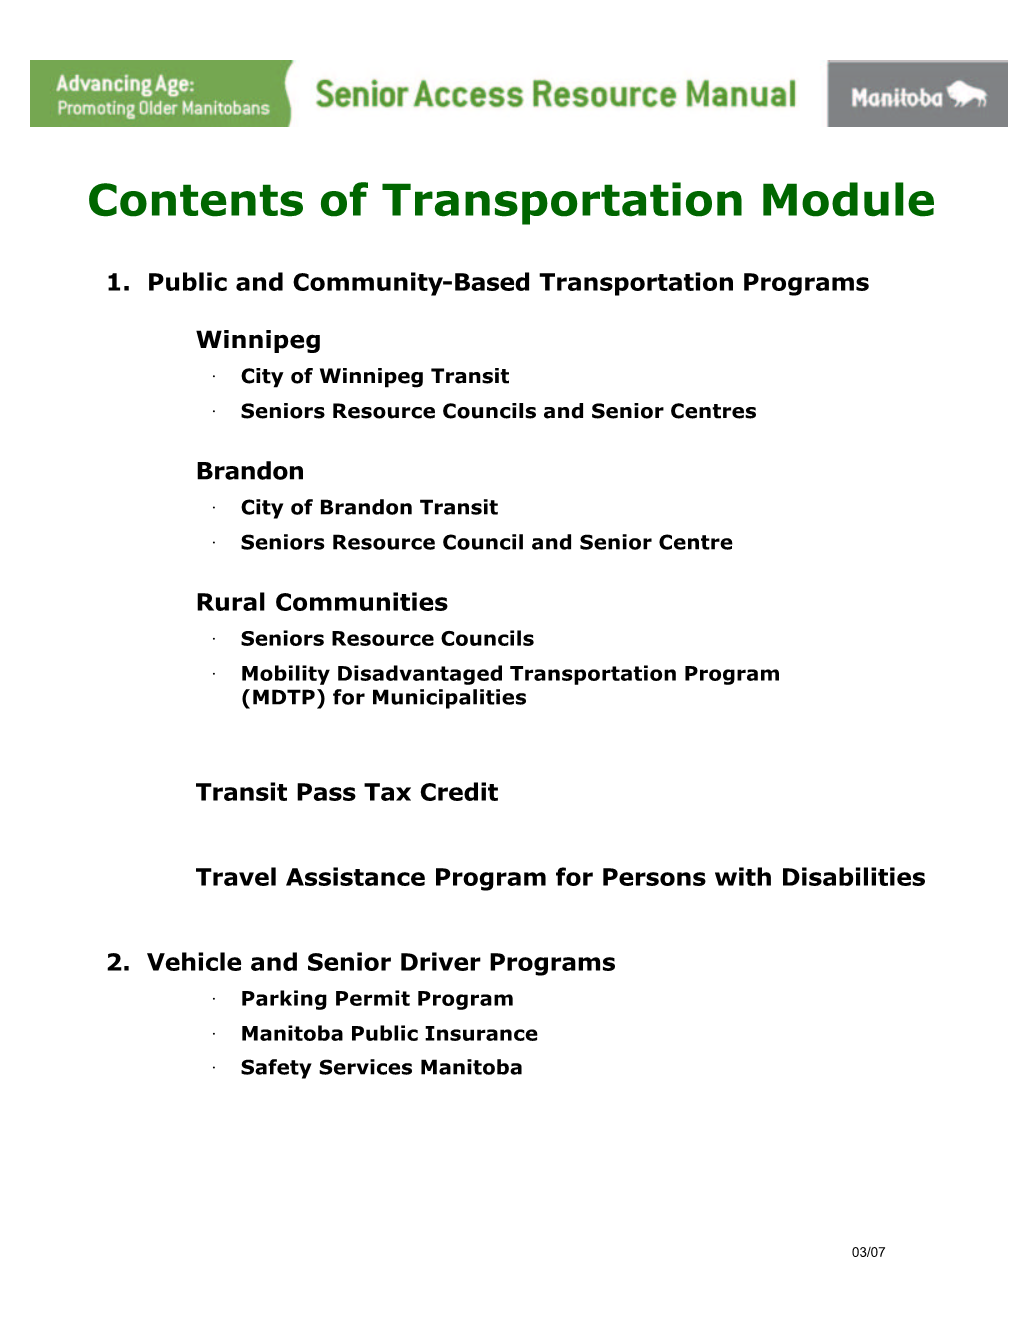 Contents of Transportation Module